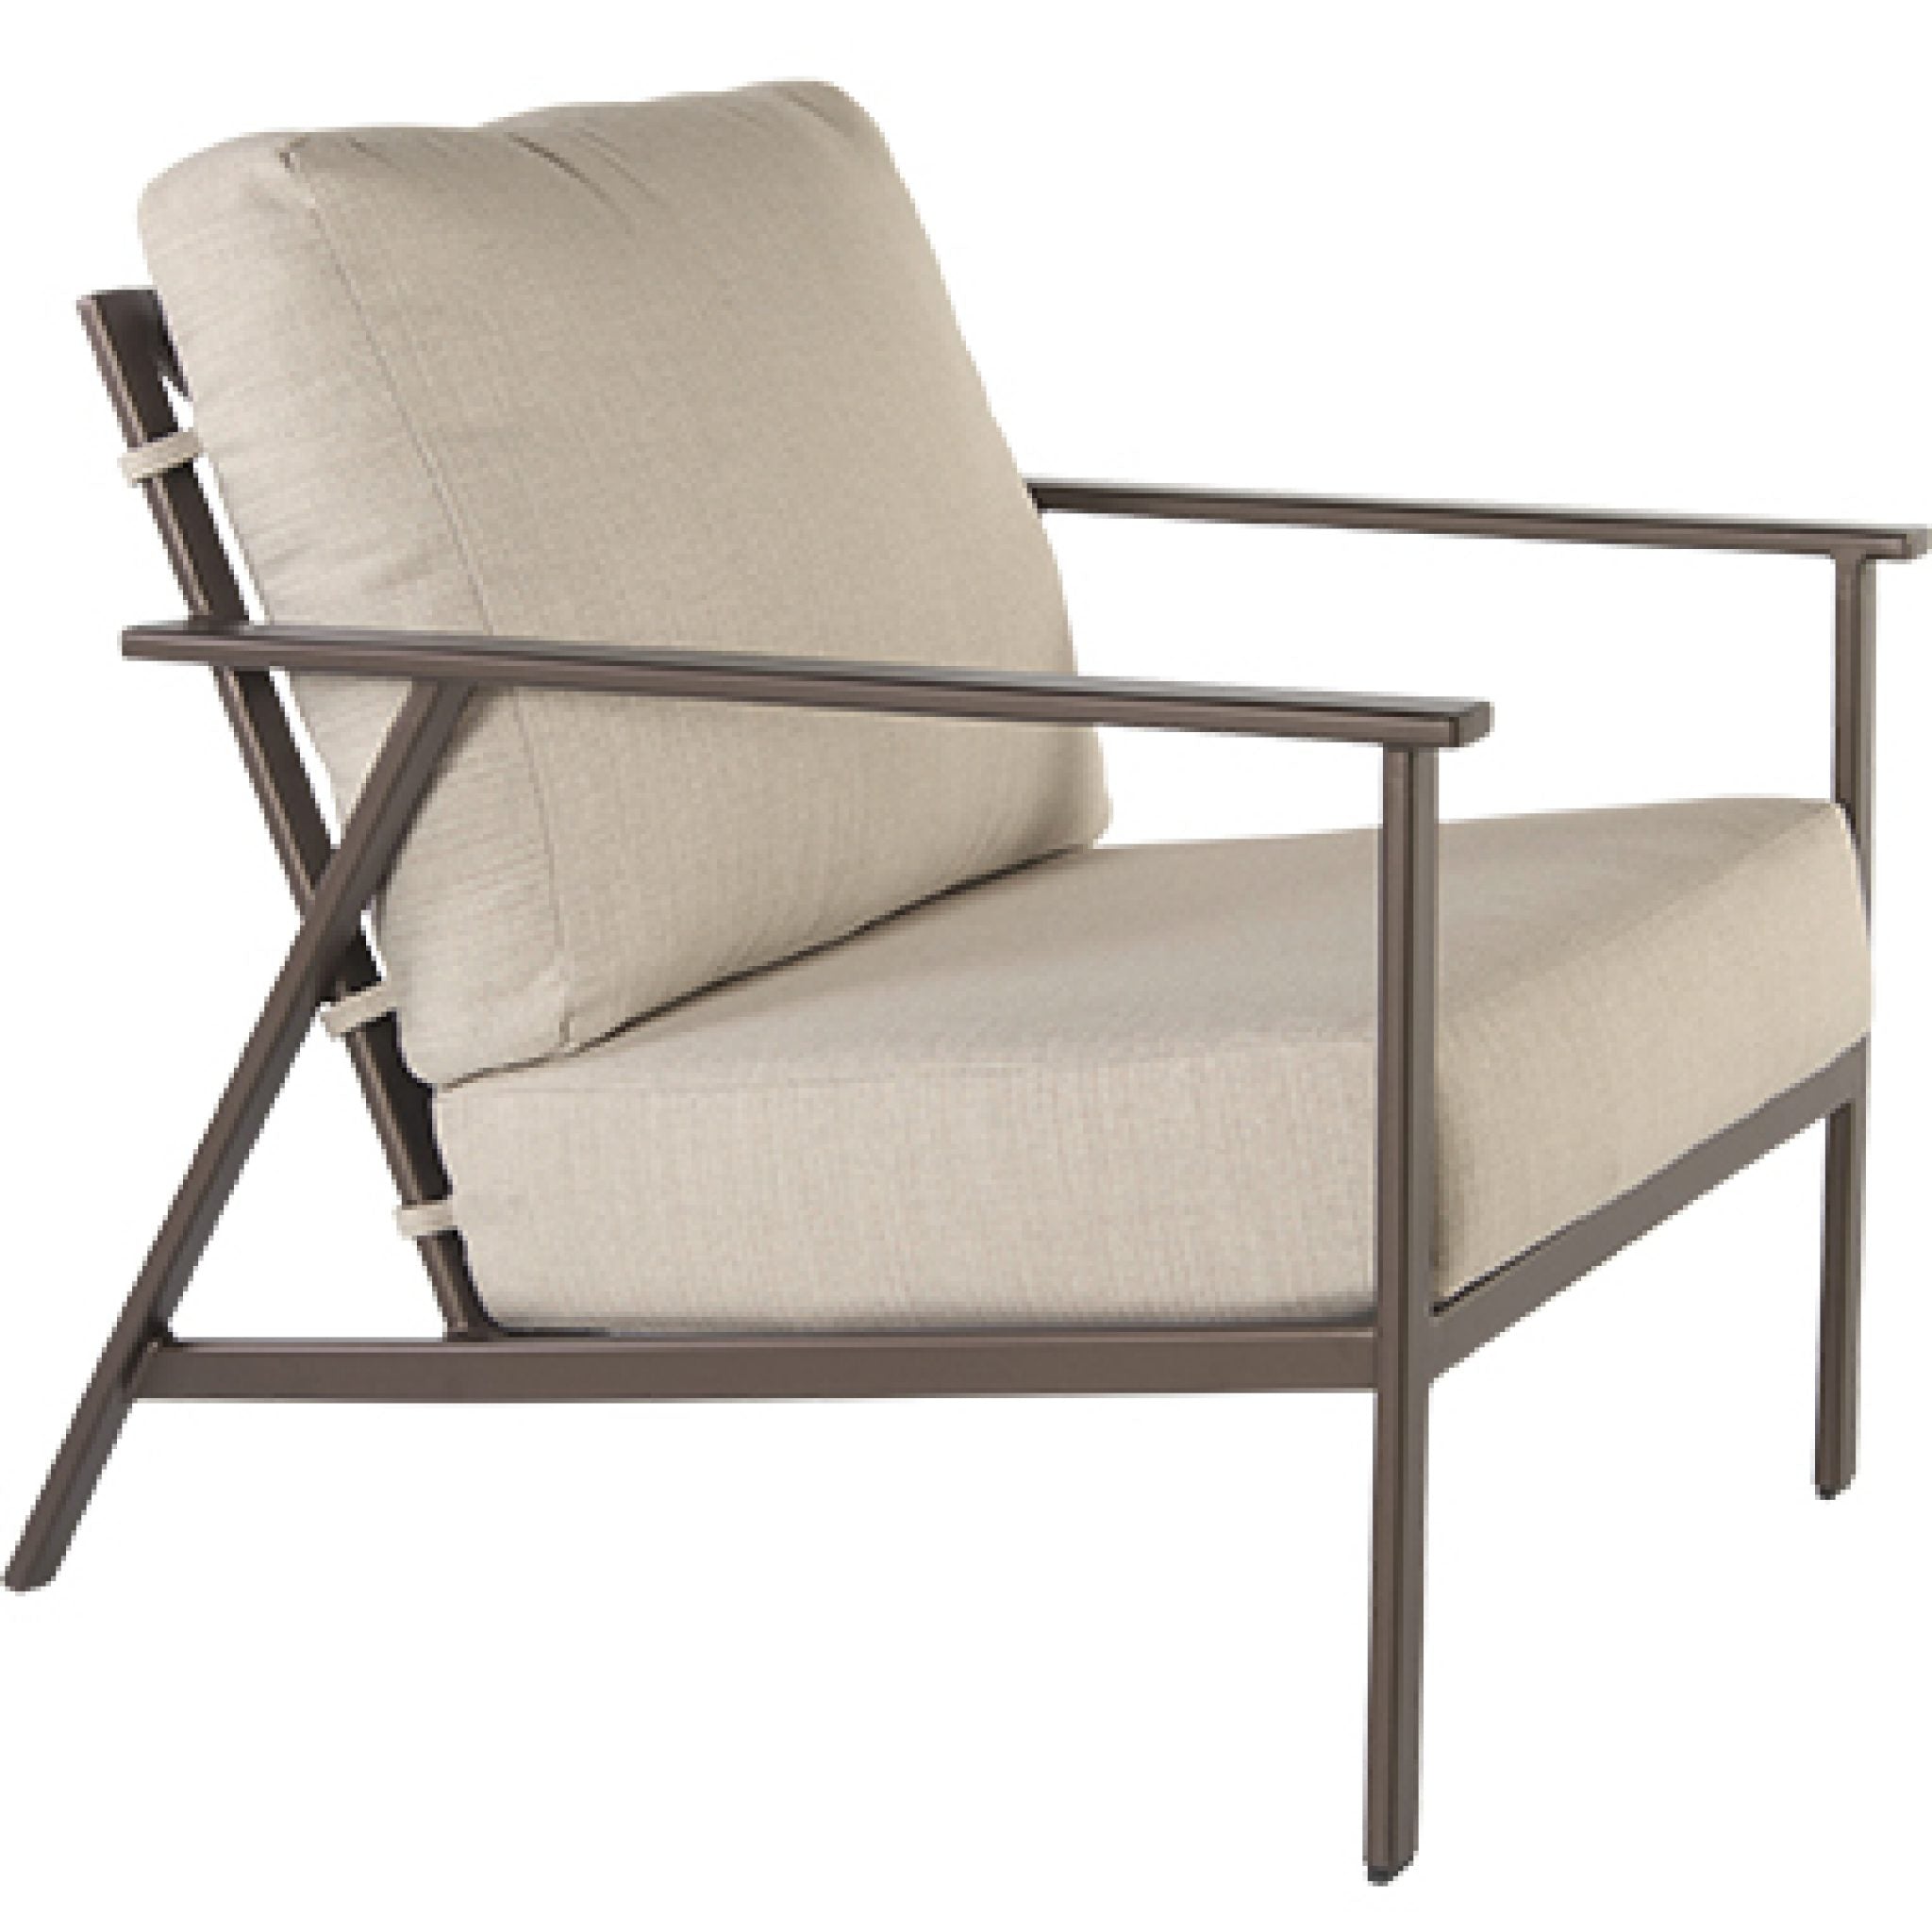 Marin Lounge Chair by Ow Lee